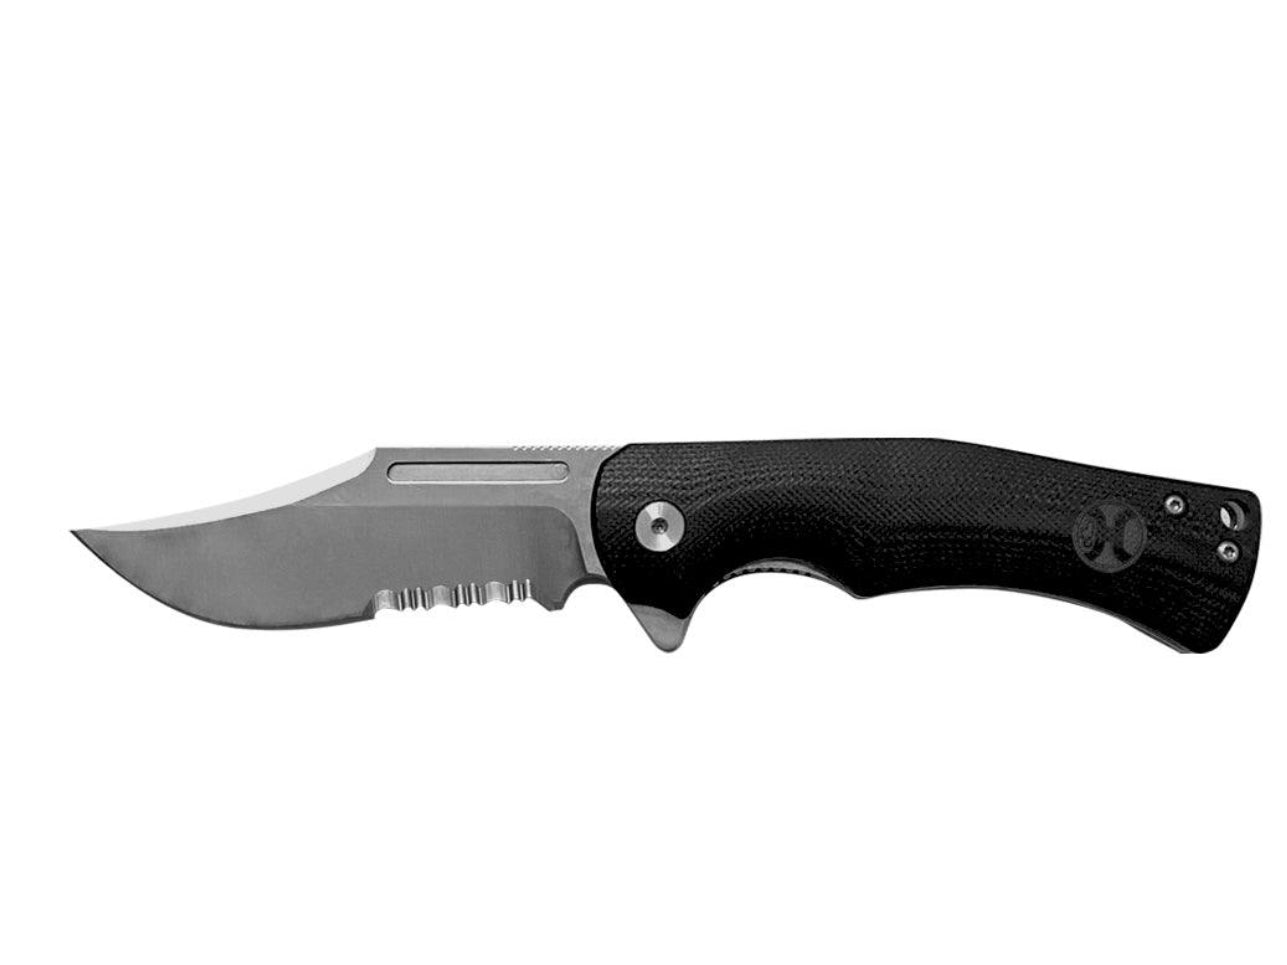 HOOEY KNIFE, BLACK CLIP POINT FLIPPER 3.25” SERRATED BLADE WITH A 4.25” HANDLE